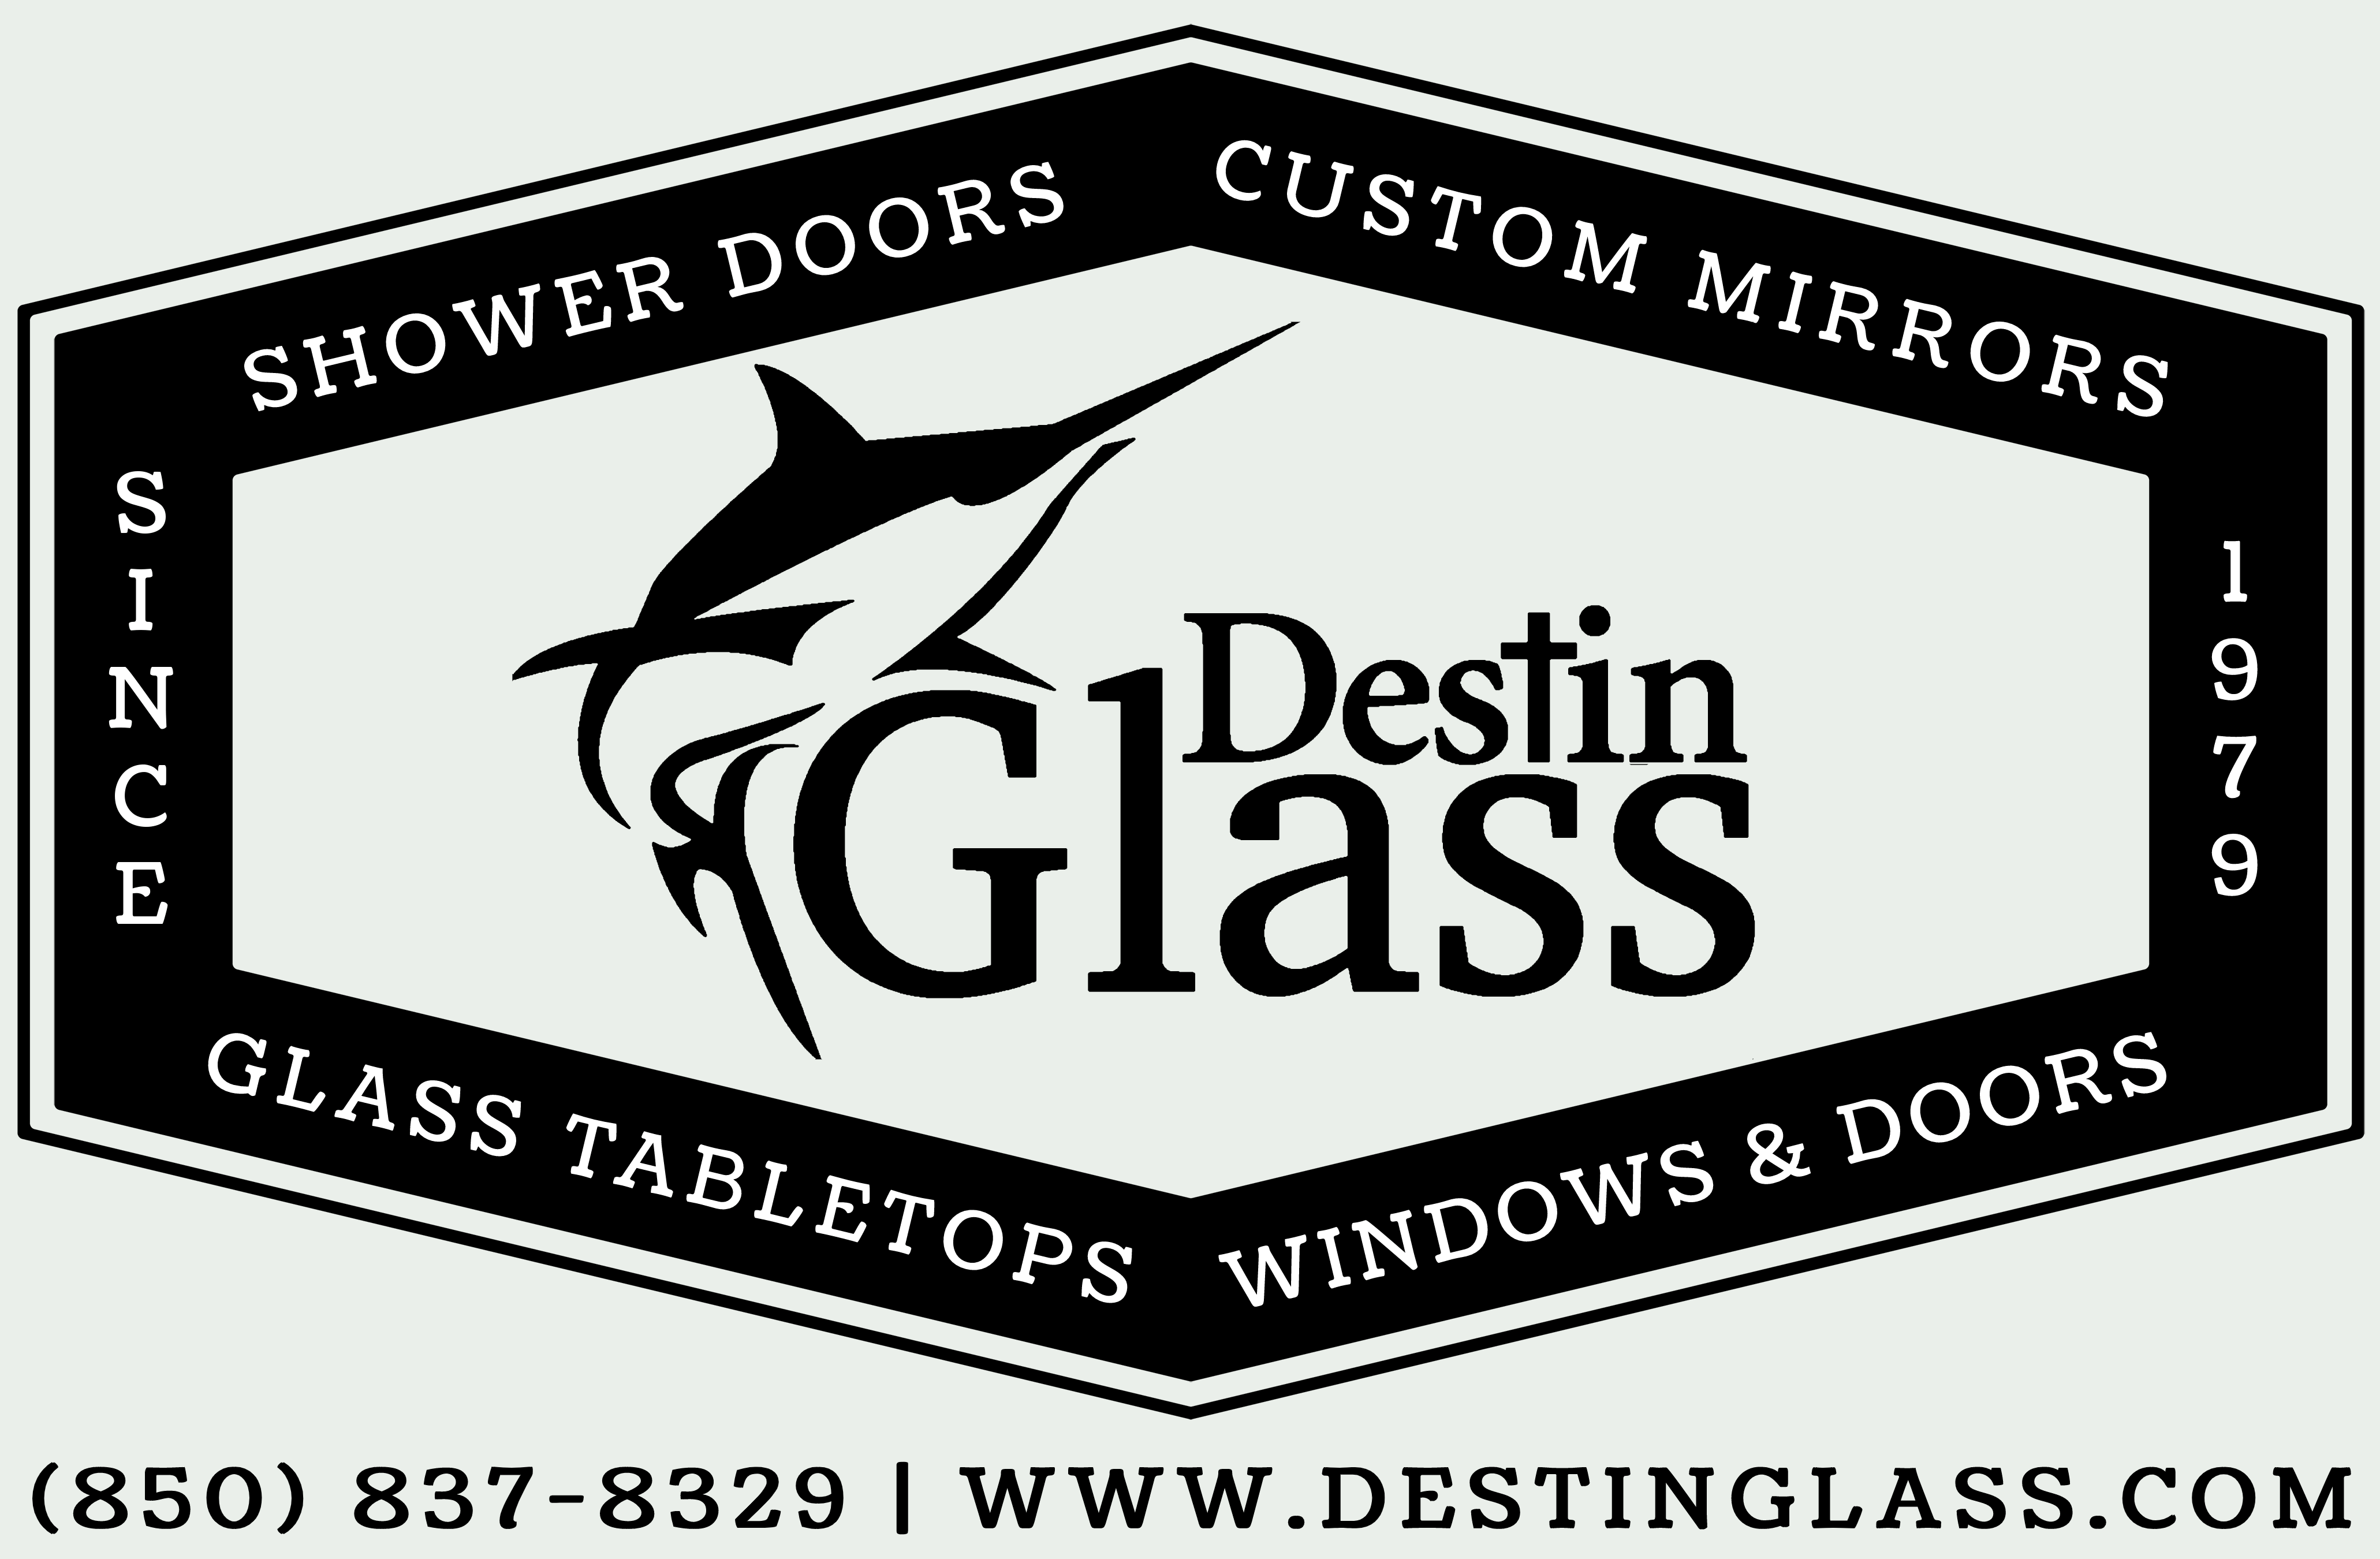 Annealed Vs Tempered Vs Laminated Glass Differences  Destin Glass (850)  837-8329 - Shower Doors, Mirrors, Table Tops & Windows